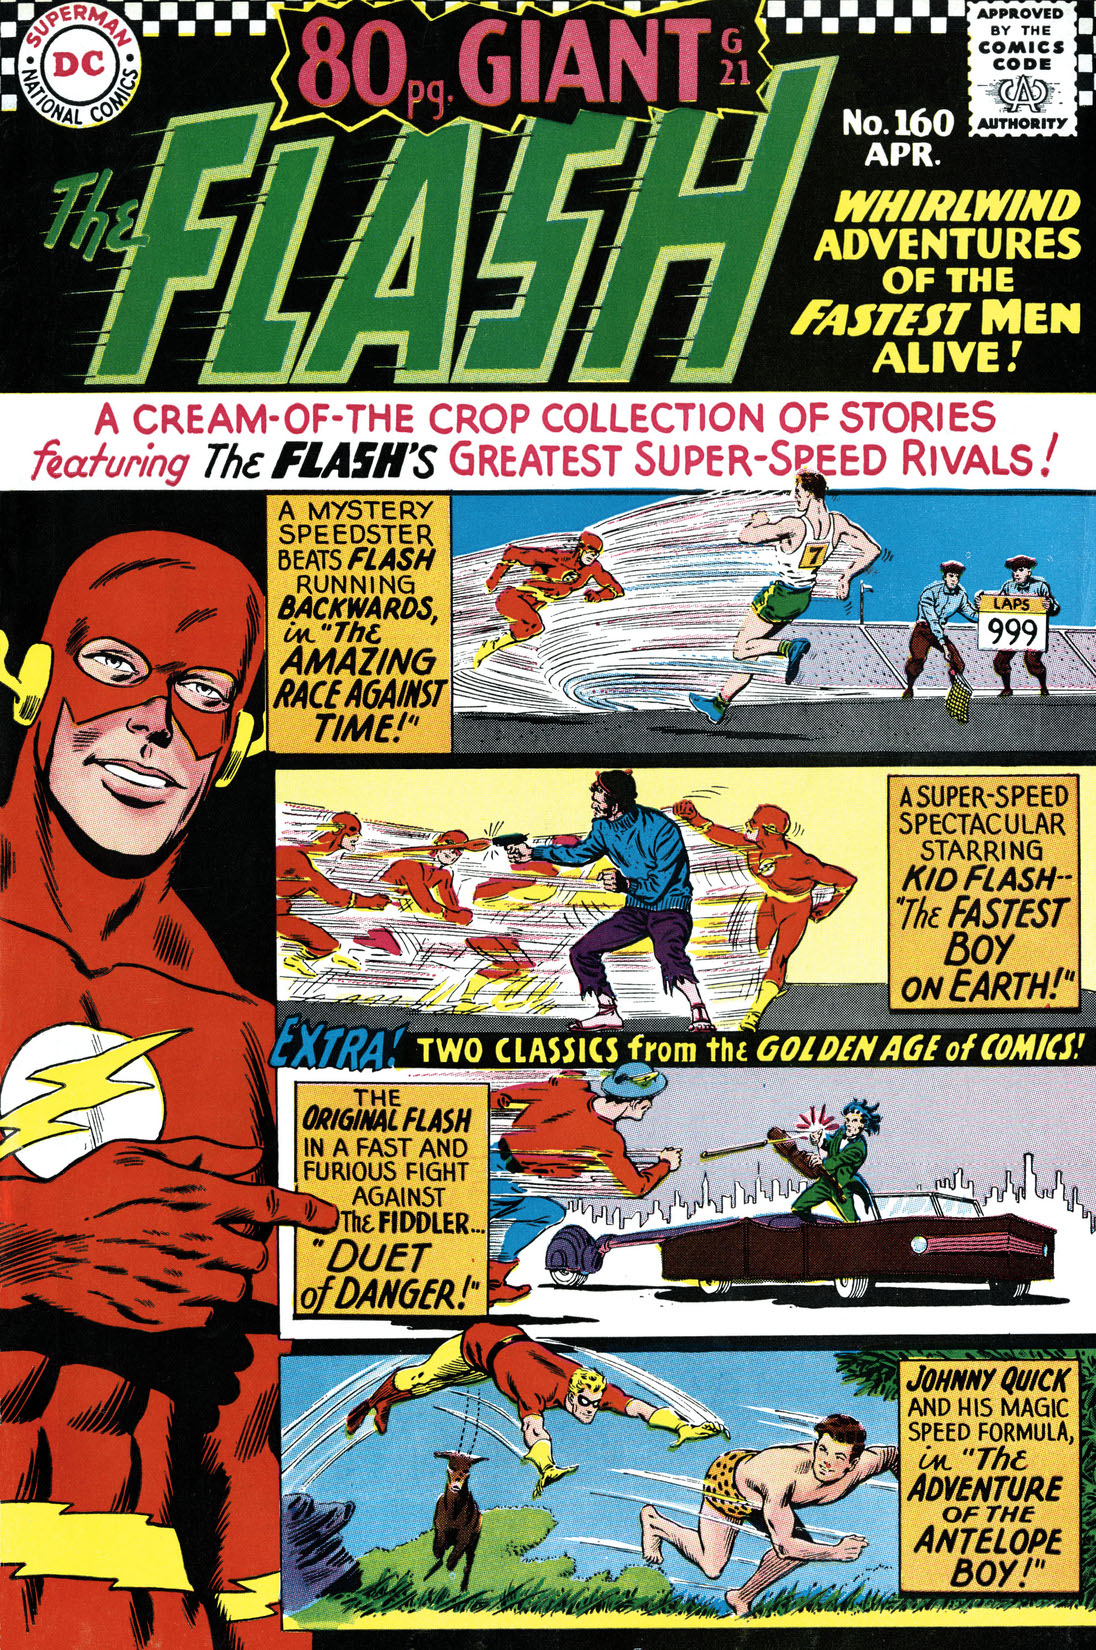 The Flash (1959-) #160 preview images